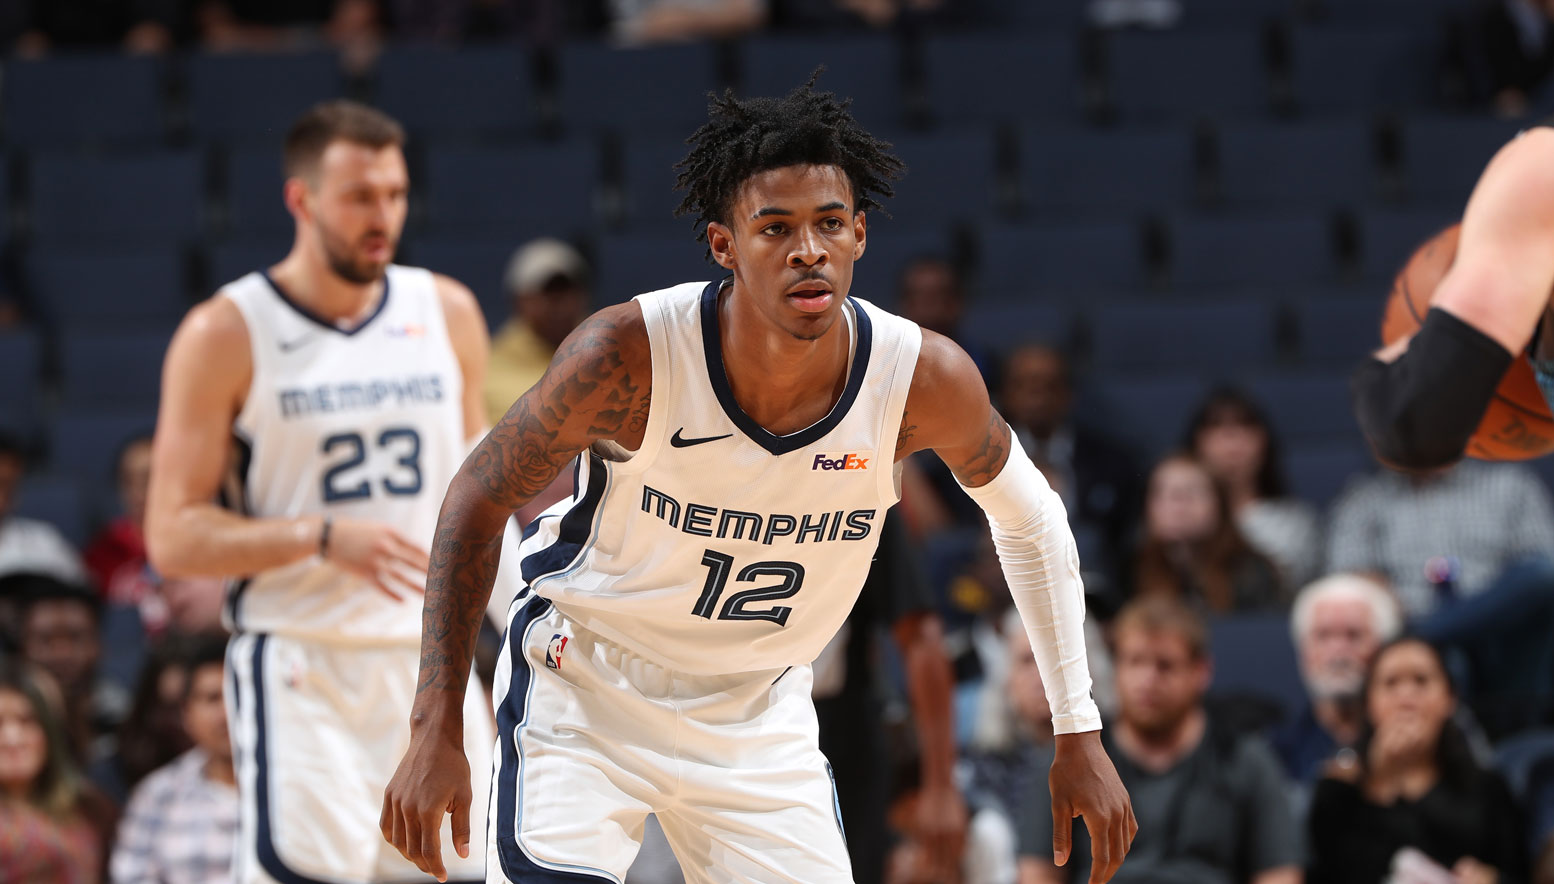 MikeCheck: Morant ramps up workload in return to practice, but will miss fourth straight game as Grizzlies face Jazz